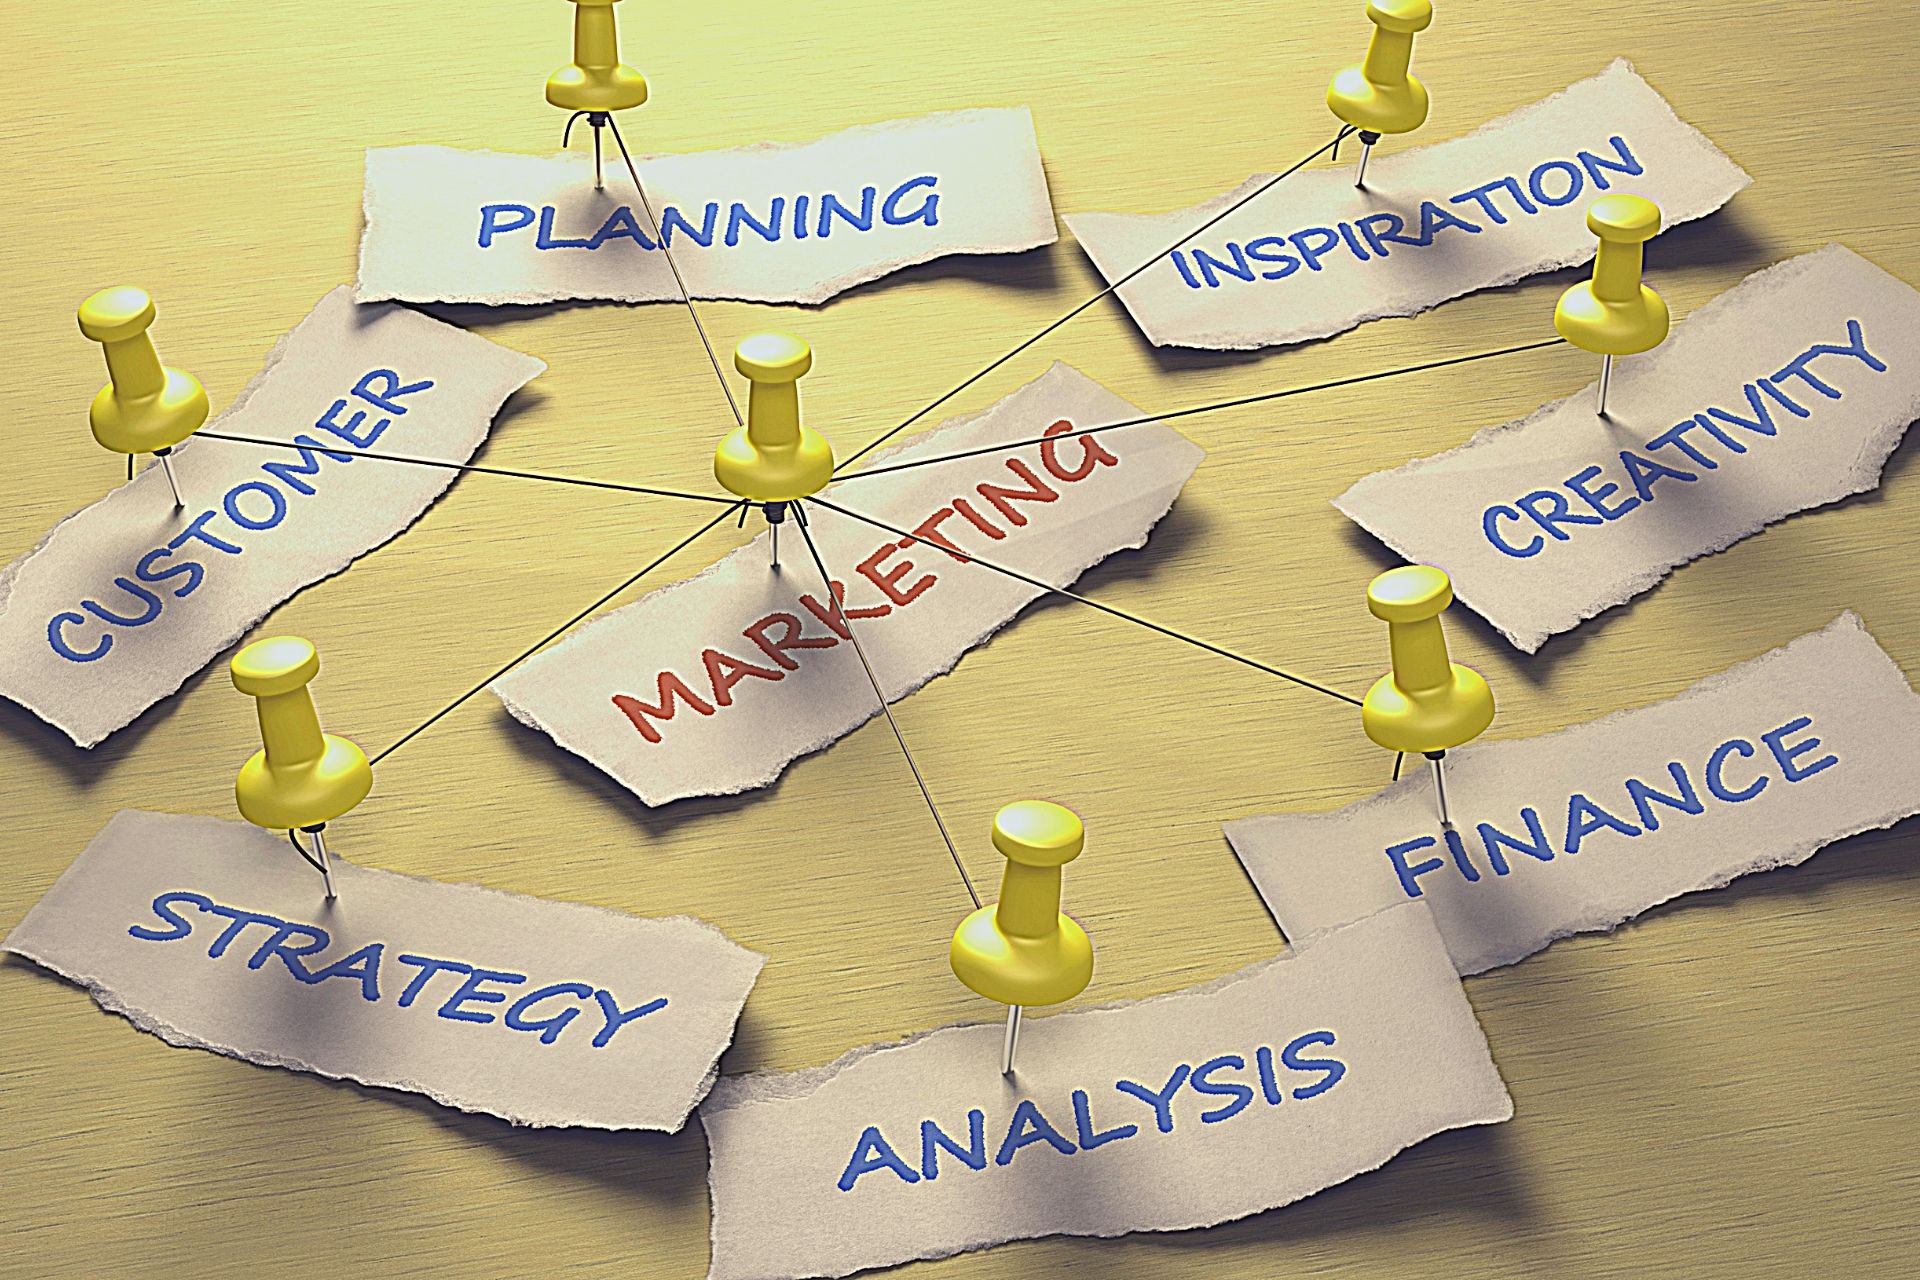 6 Key Components for a successful marketing plan